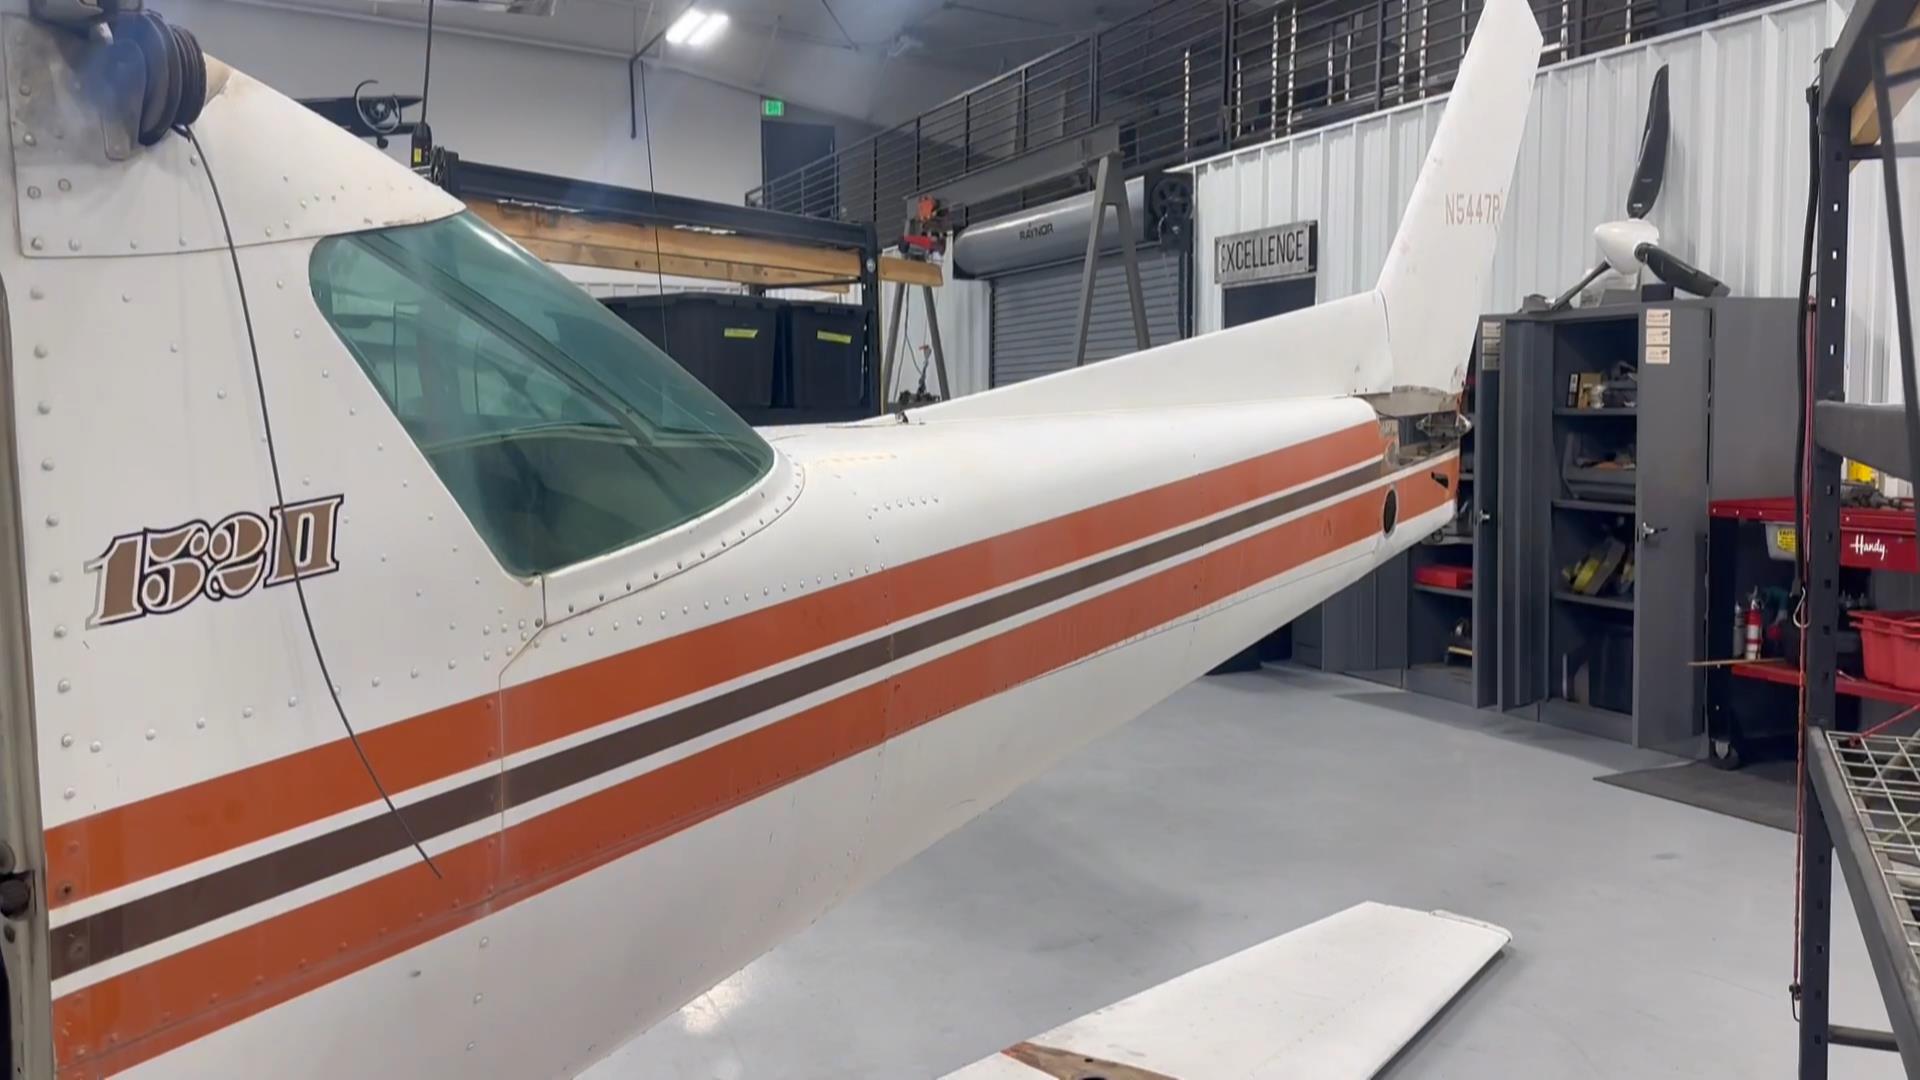 Cessna 152 Tail structure